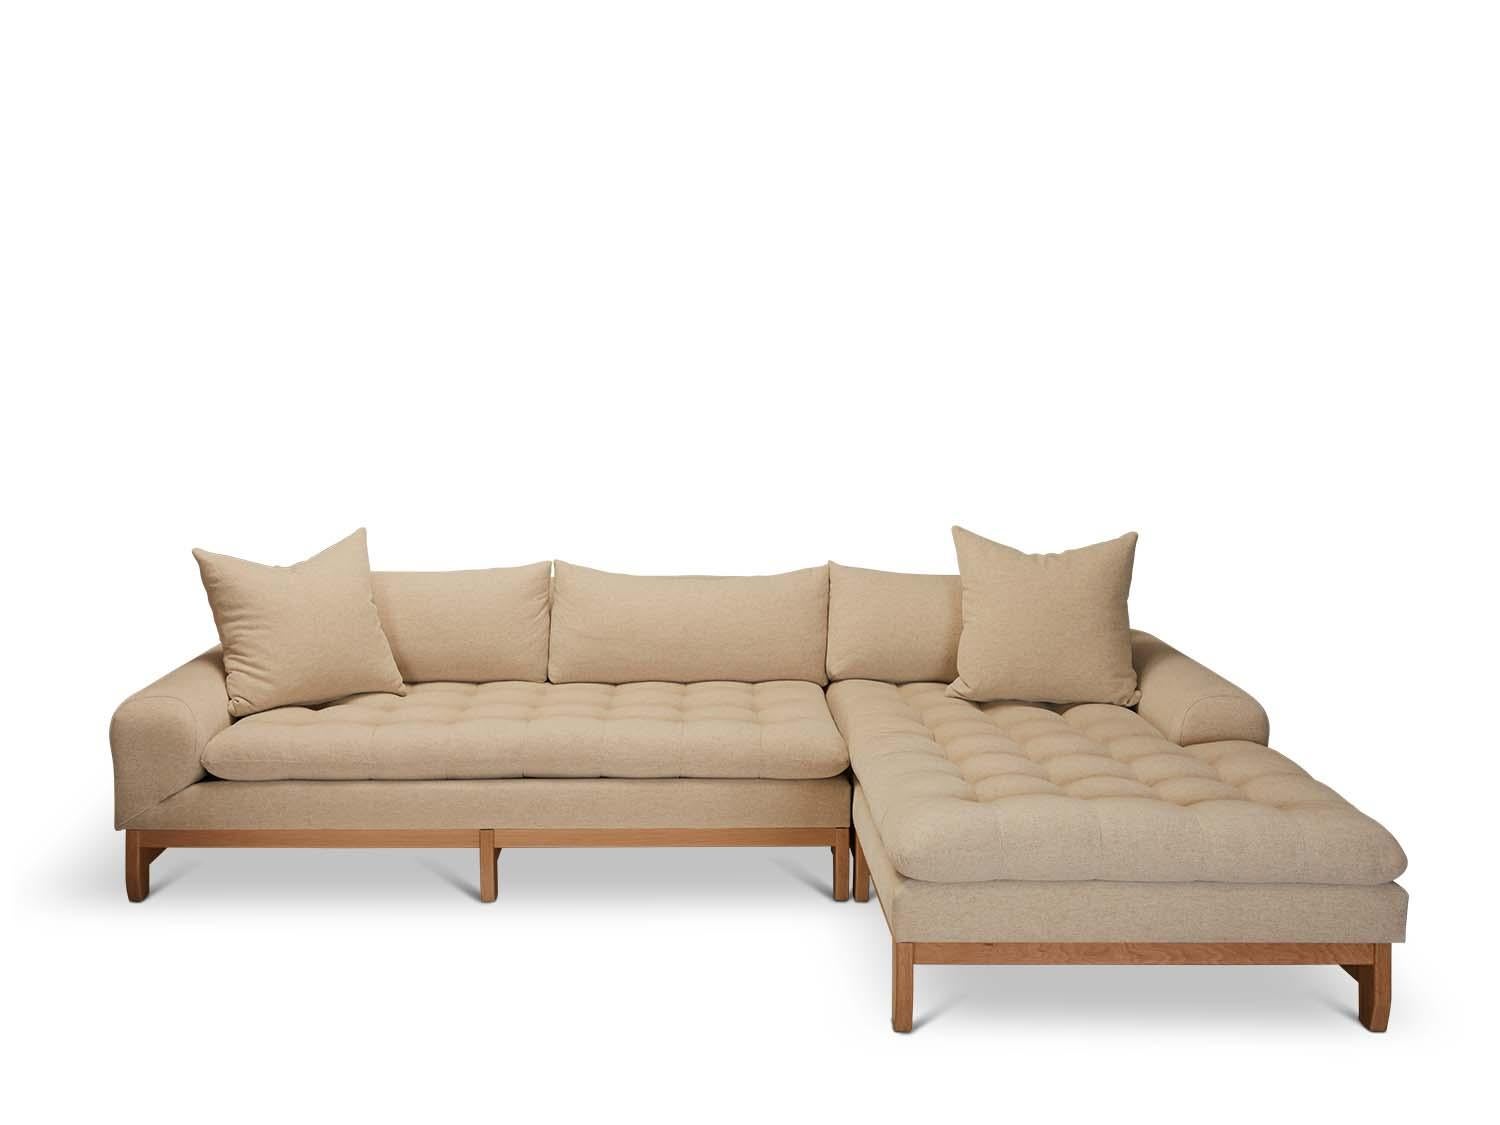 The Morro Sectional is our deepest and largest scaled sectional featuring a biscuit tufted seat, loose back cushions and a geometrically sculpted base. Available in American walnut or white oak.

The Lawson-Fenning Collection is designed and